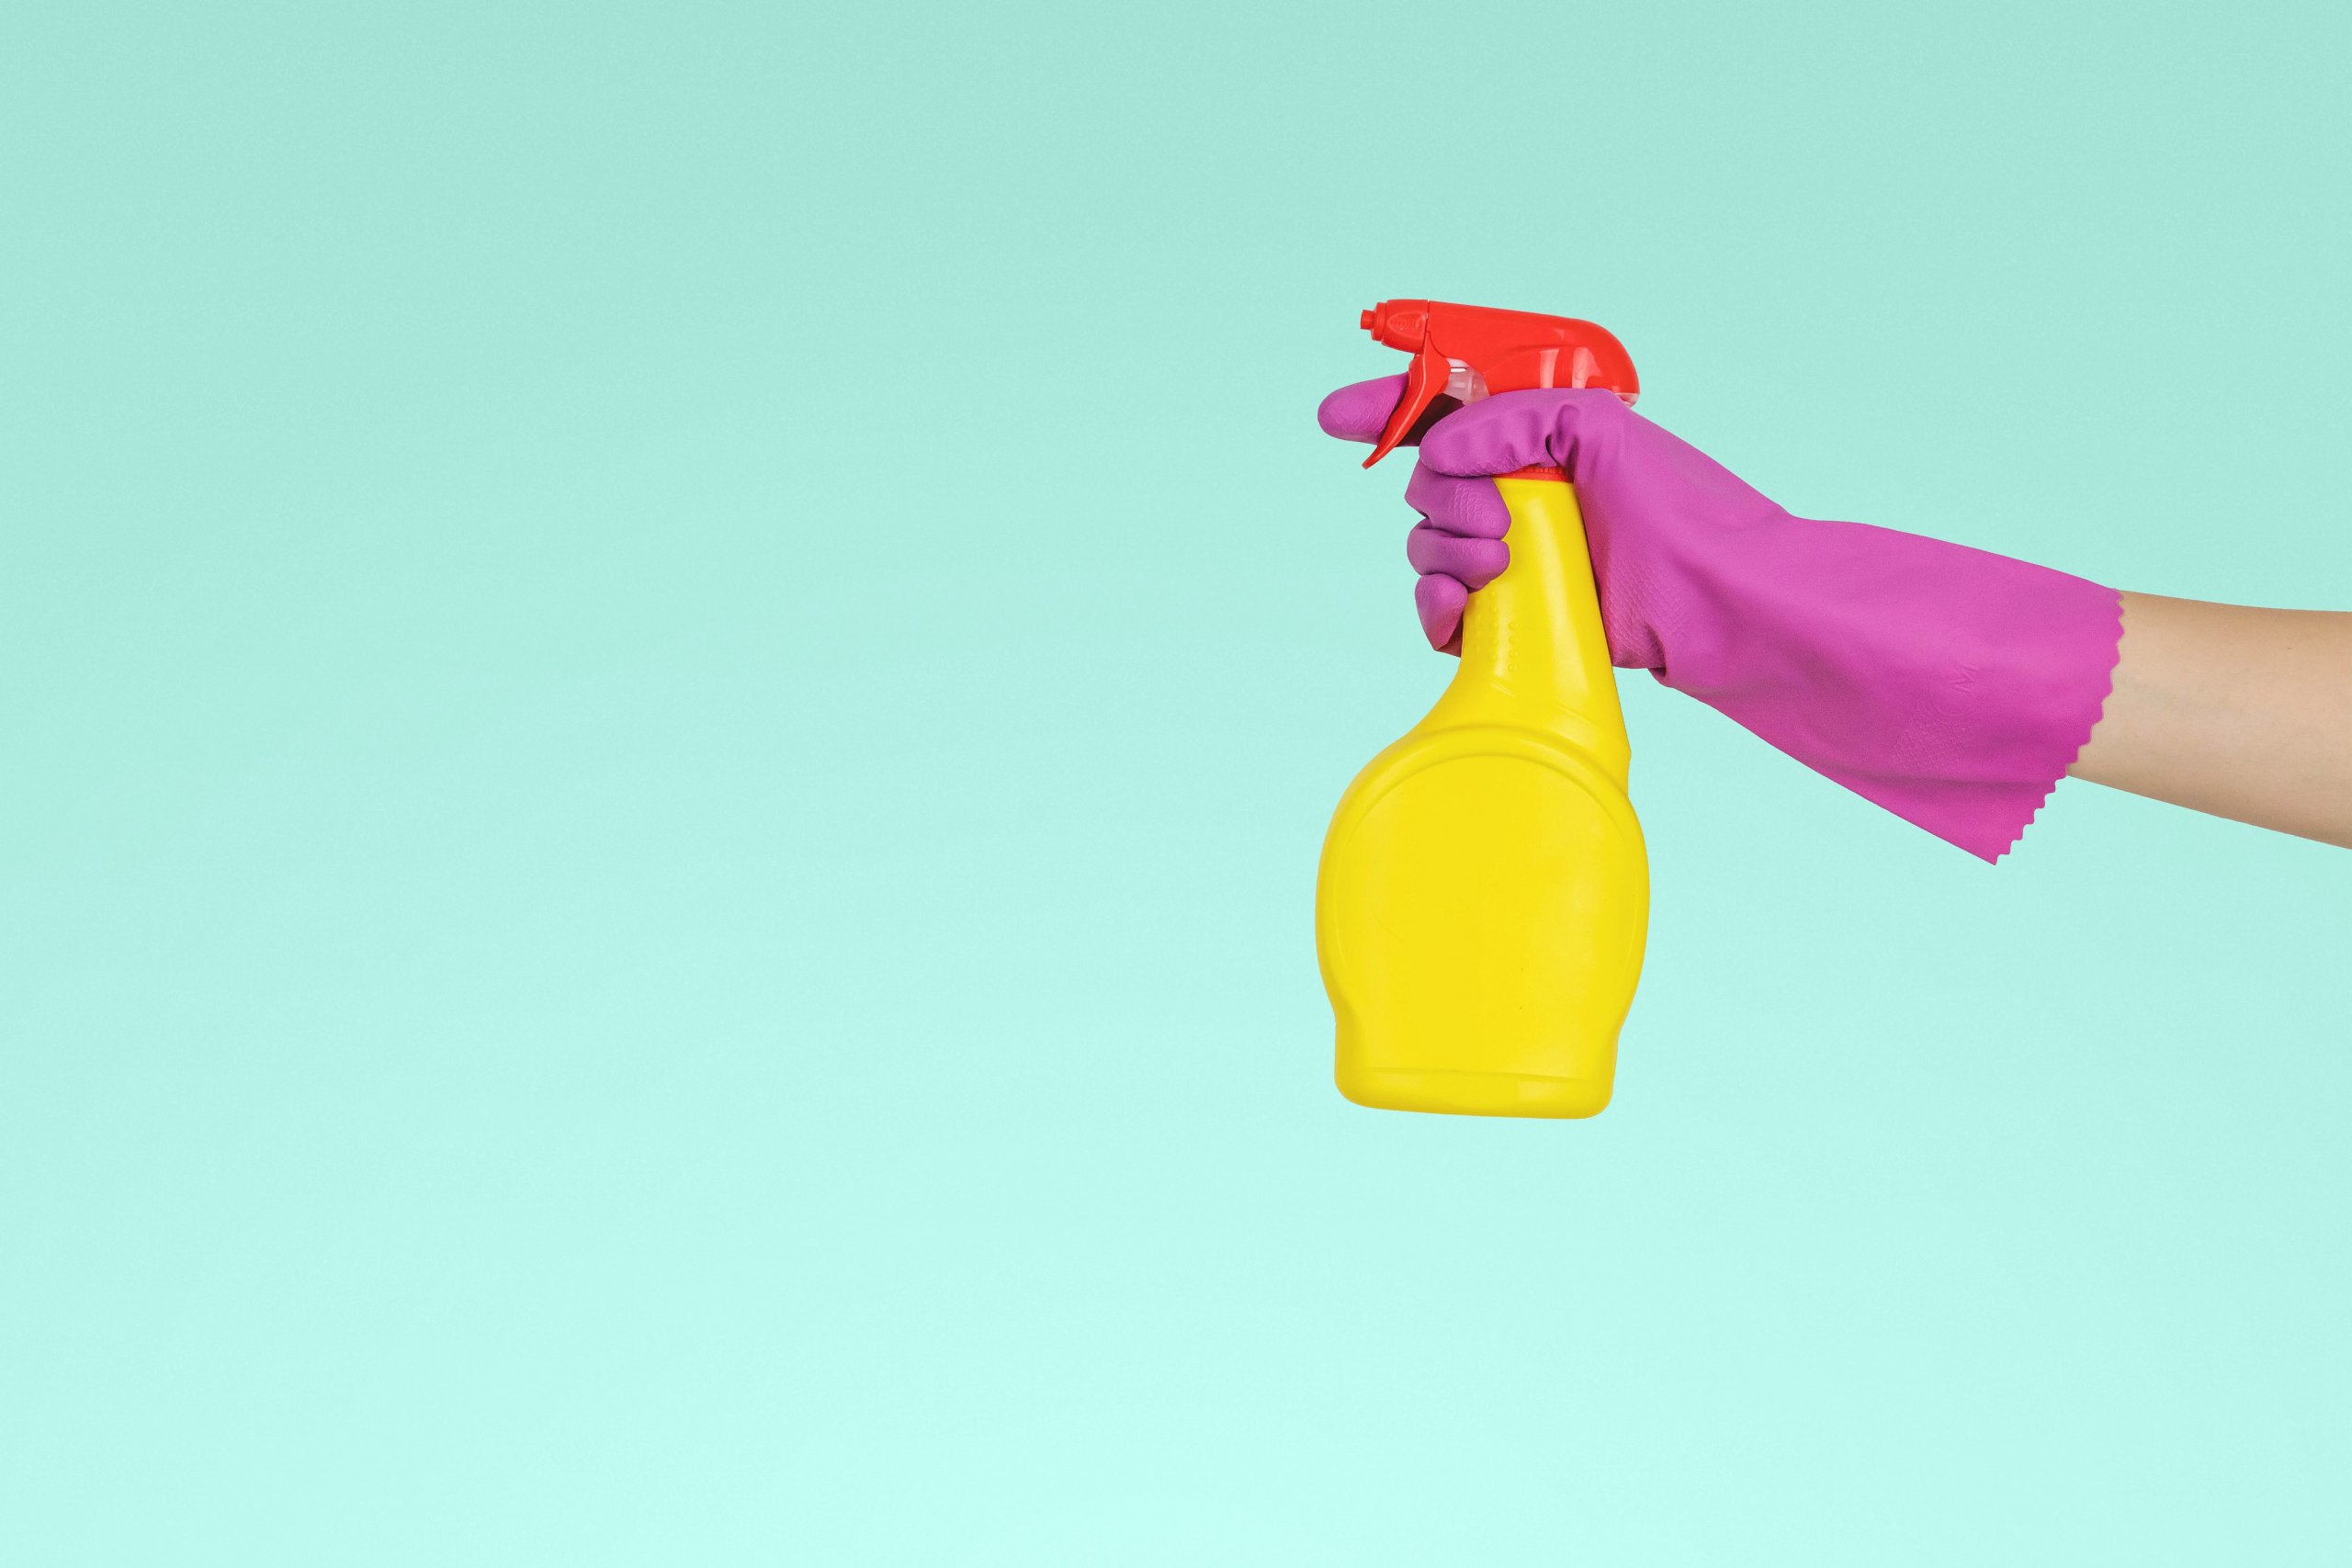 cleaner's hand with a rubber glove holding a cleaning solution spray bottle